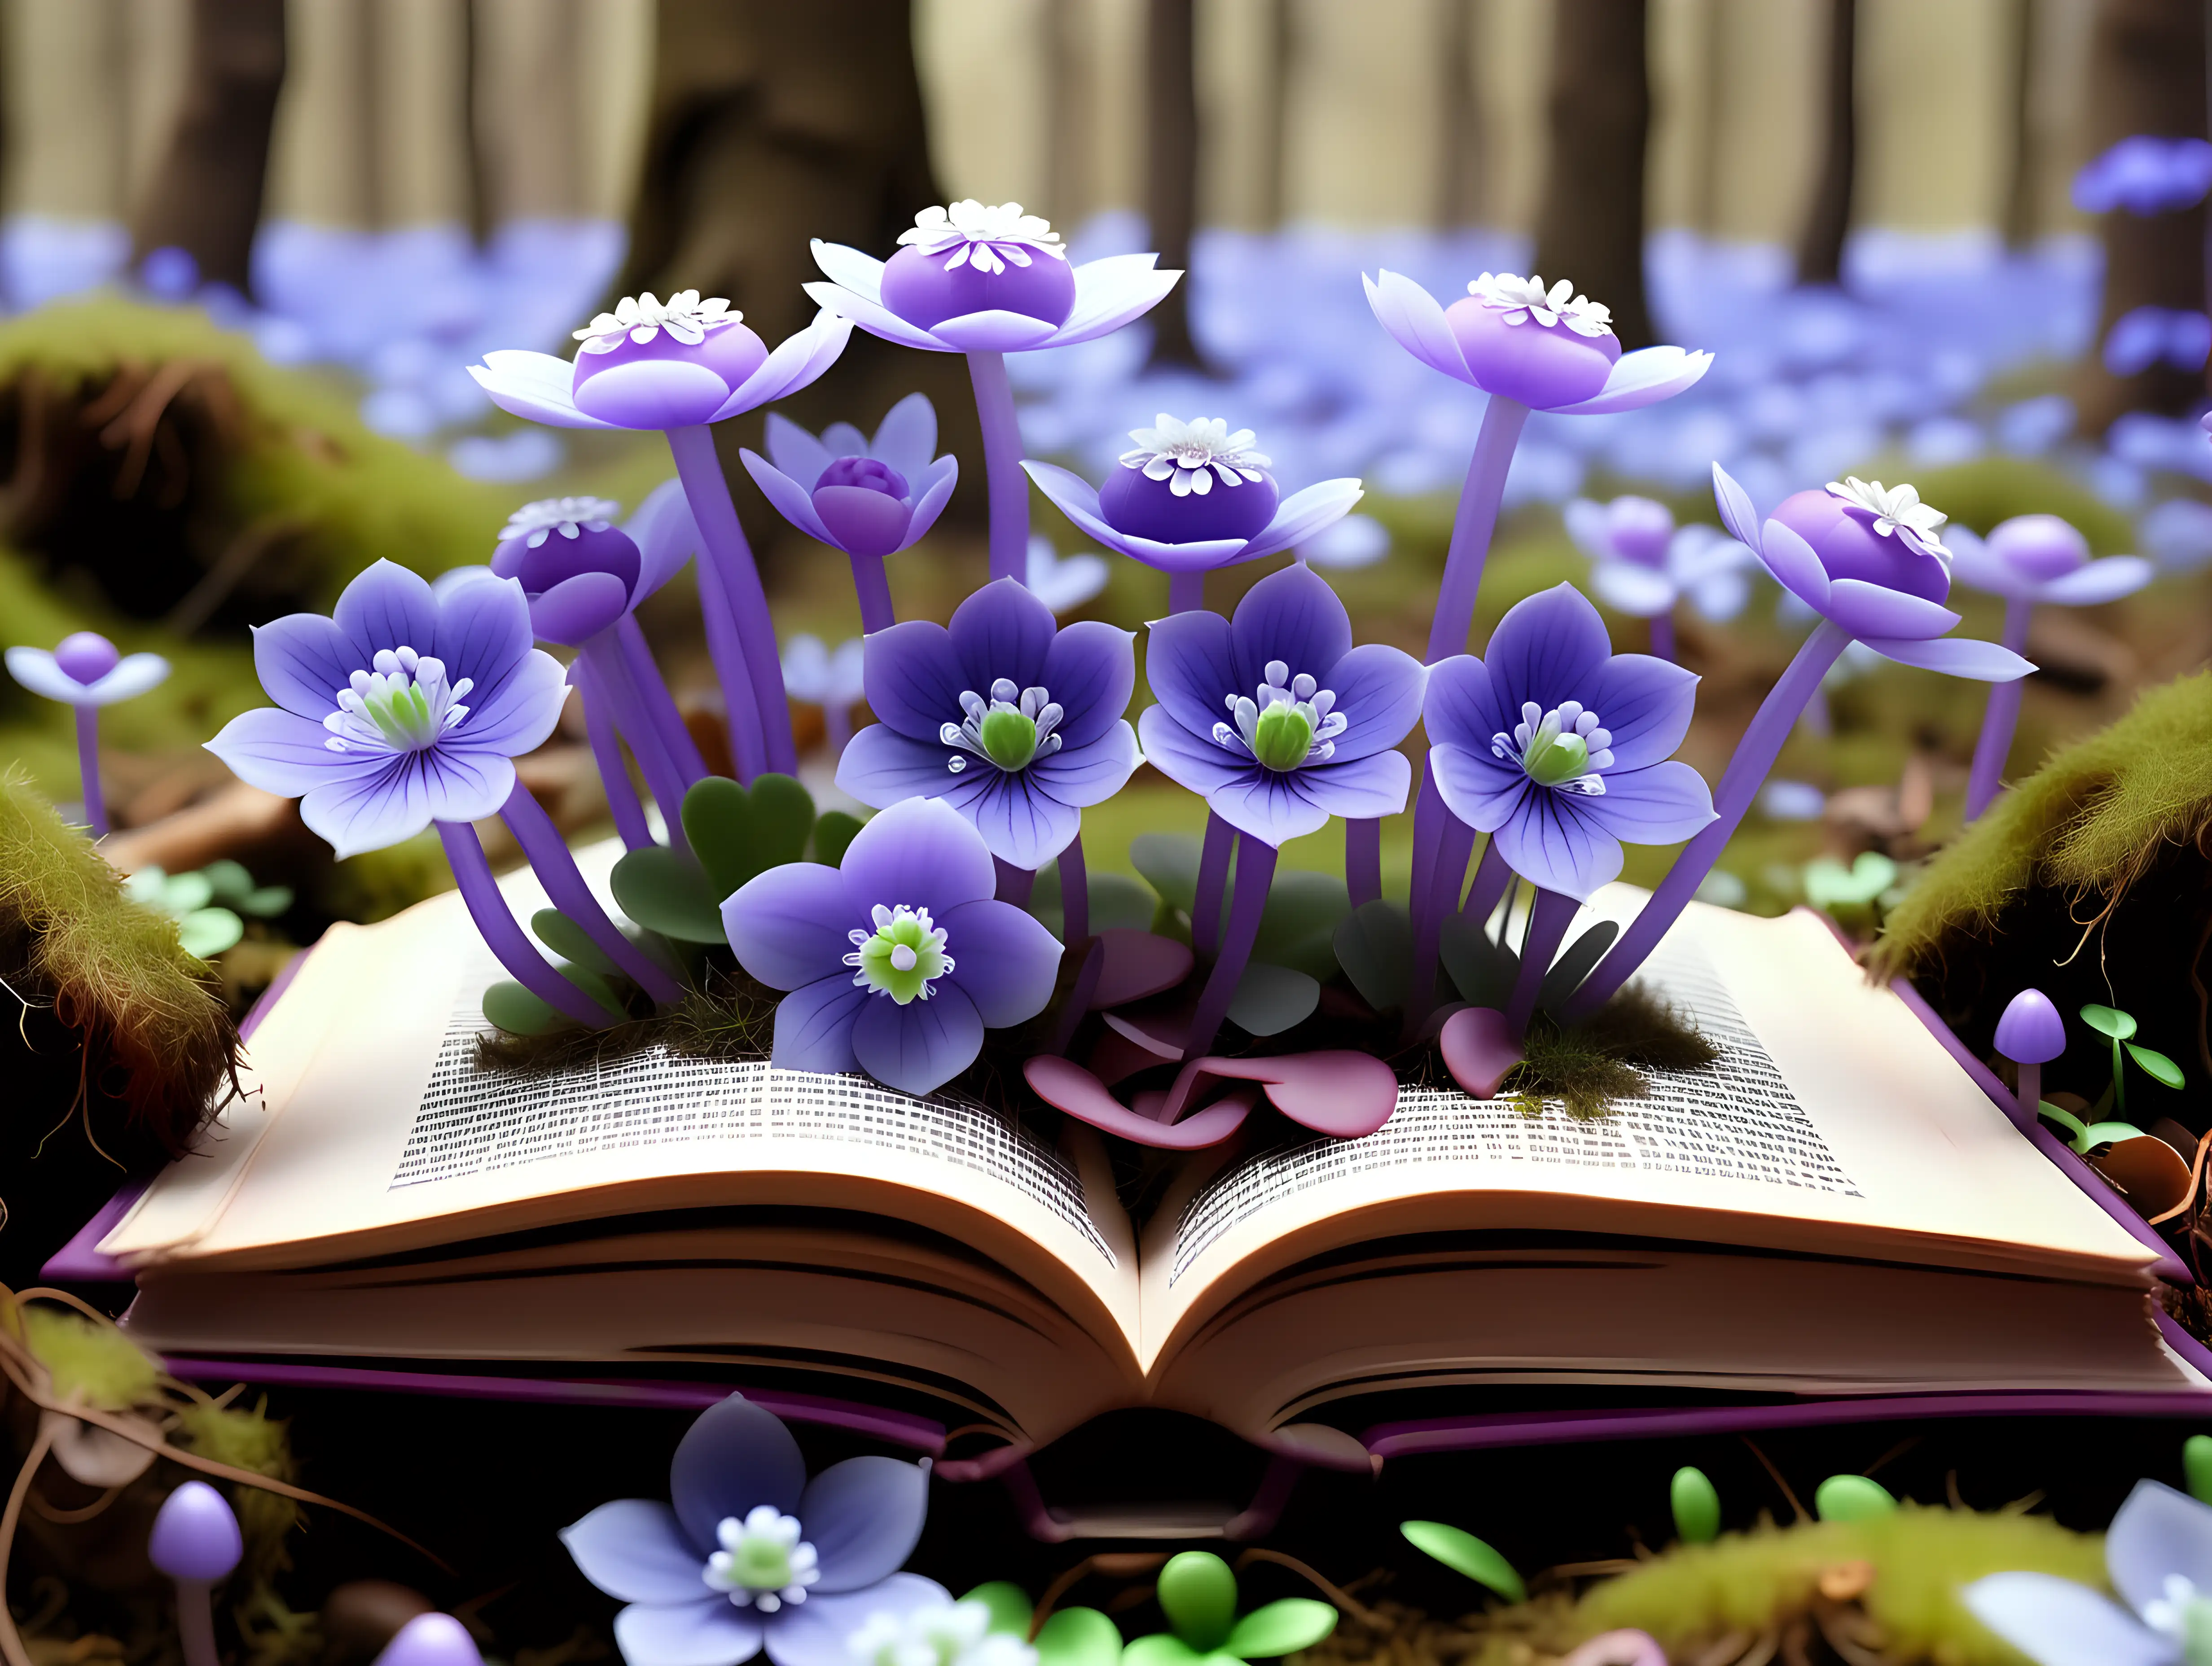 magical open book surrounded by hepatica flowers in a spring forest